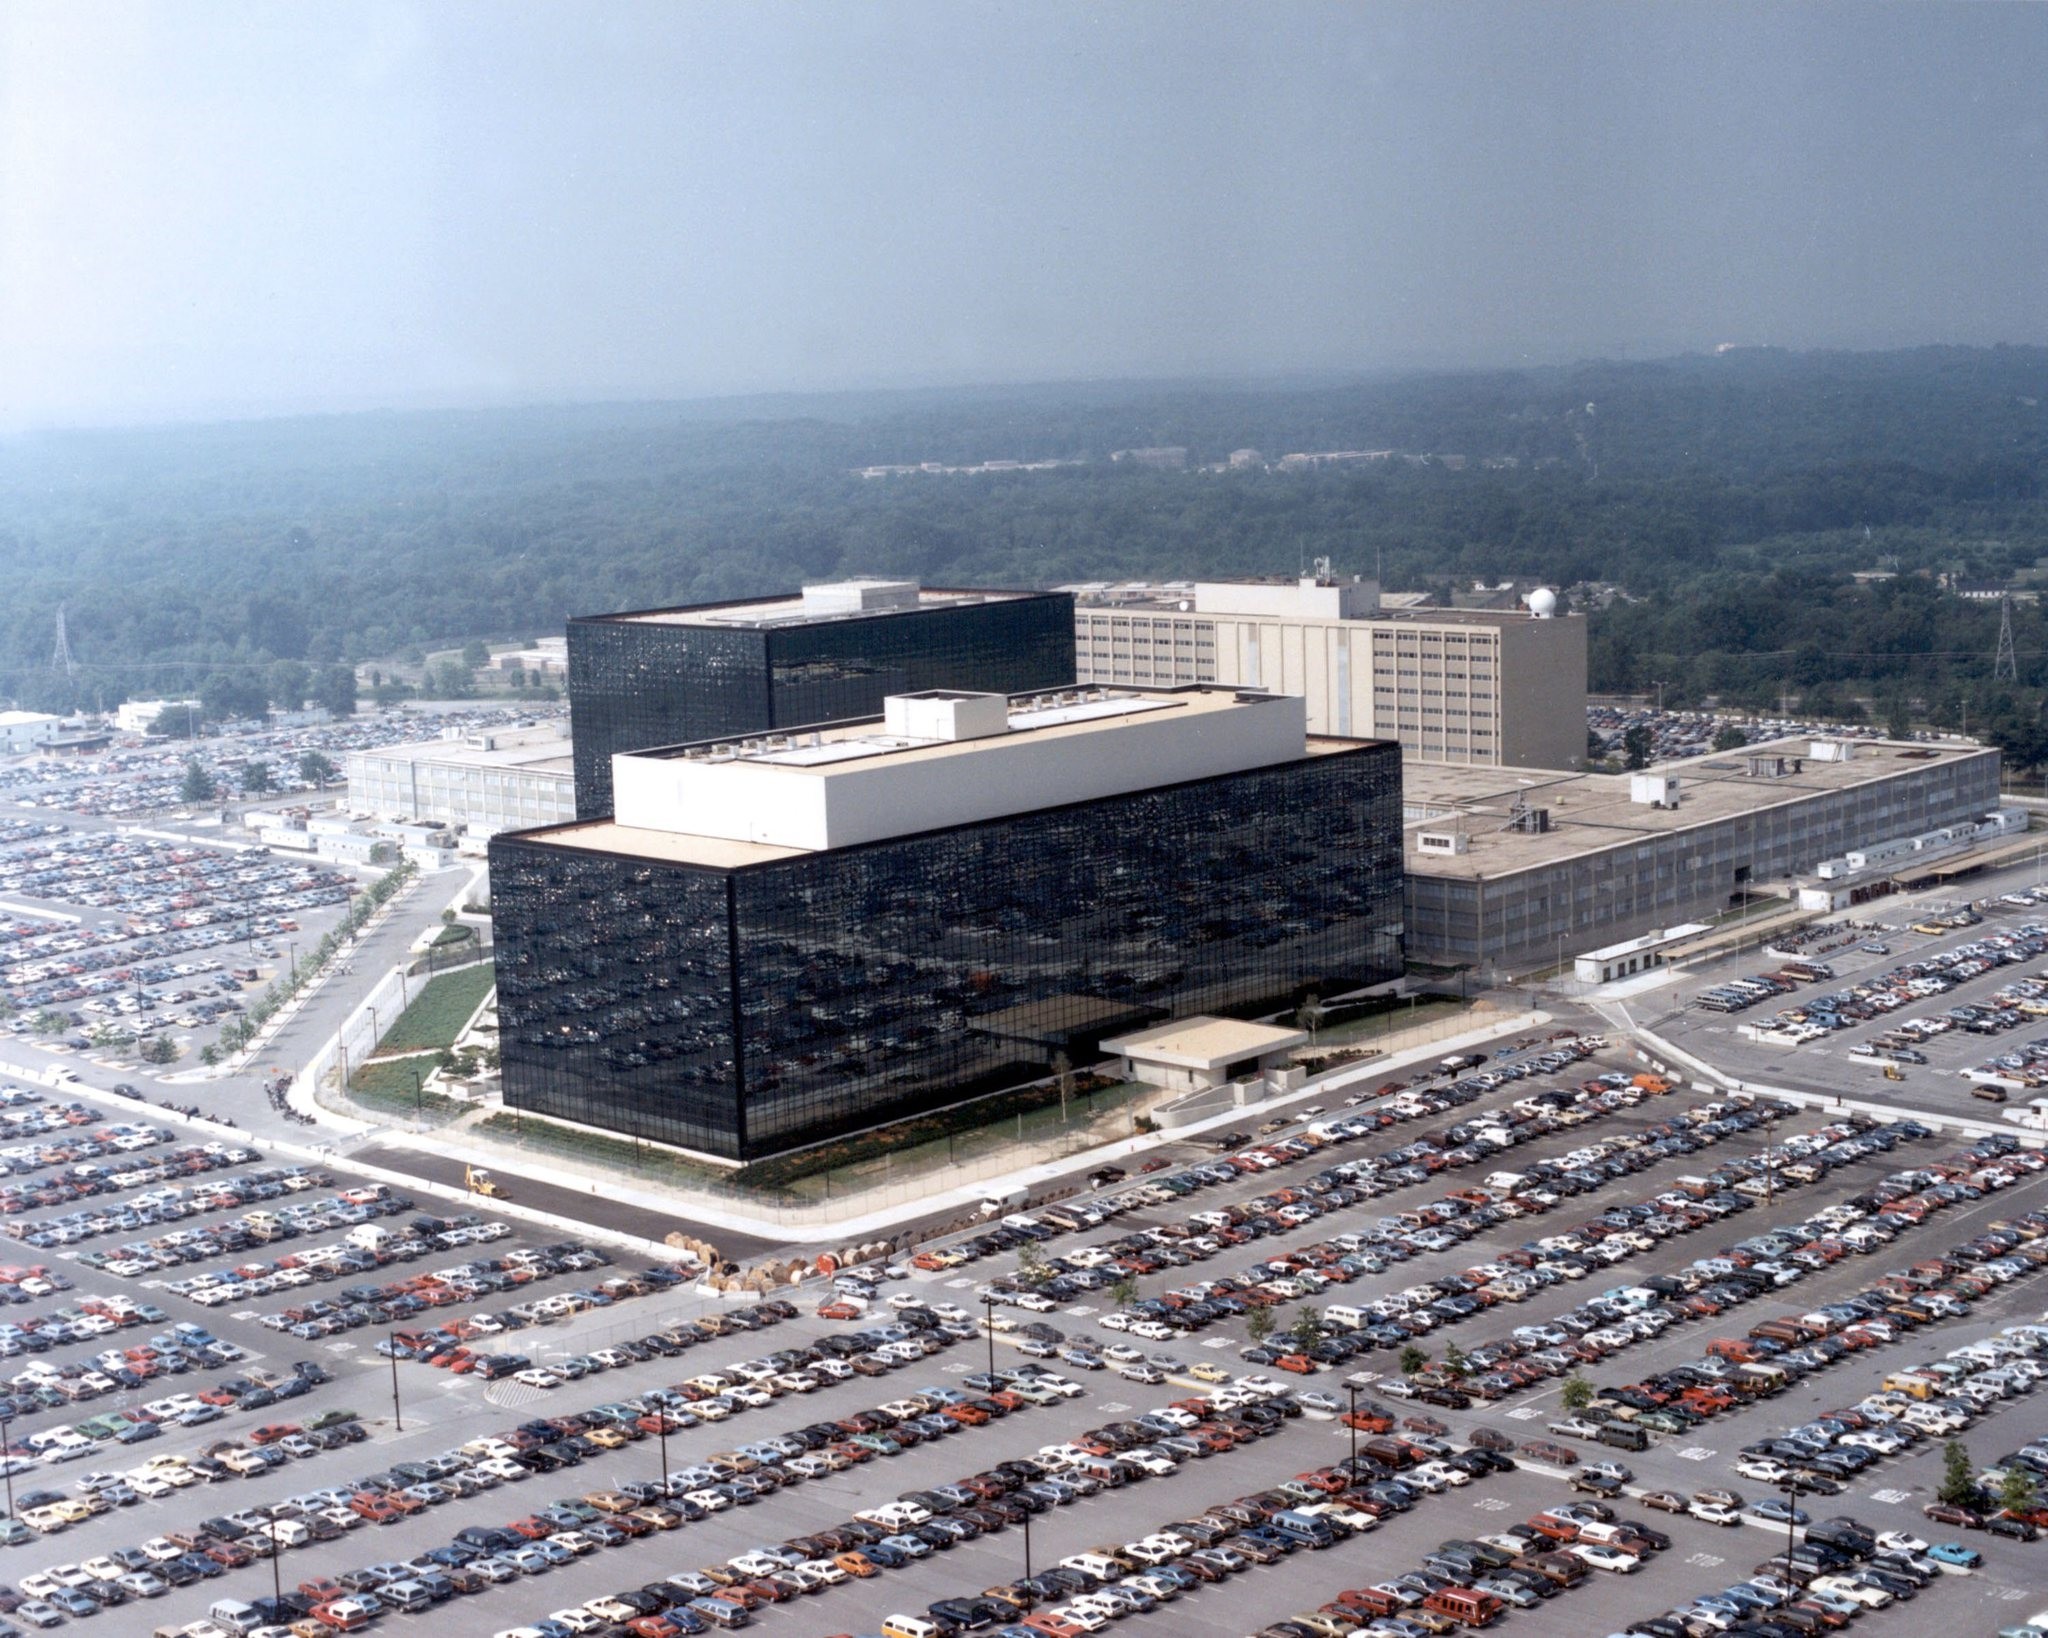 This undated photo provided by the National Security Agency (NSA) shows its headquarters in Fort Meade, Maryland. (FILE Photo)